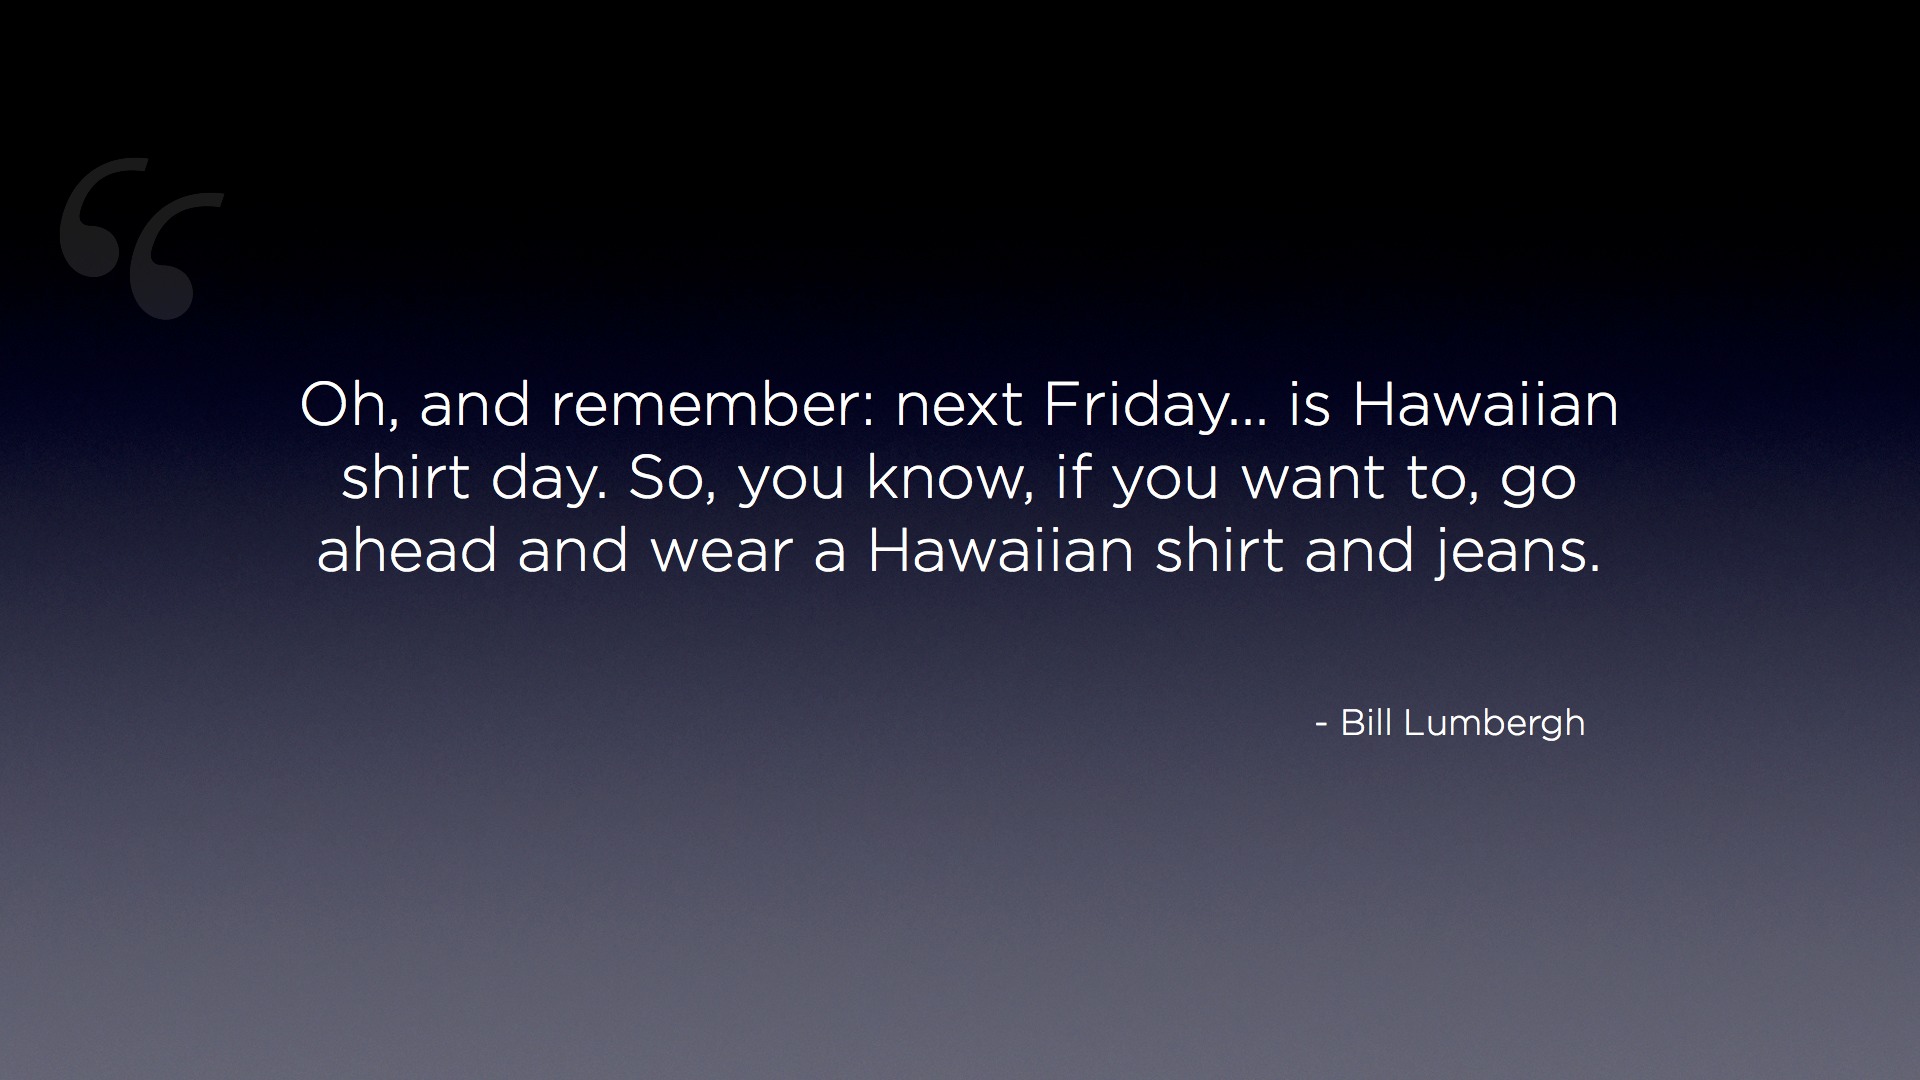 "Oh, and remember: next Friday... is Hawaiian shirt day. So, you know, if you want to, go ahead and wear a Hawaiian shirt and jeans." - Bill Lumbergh